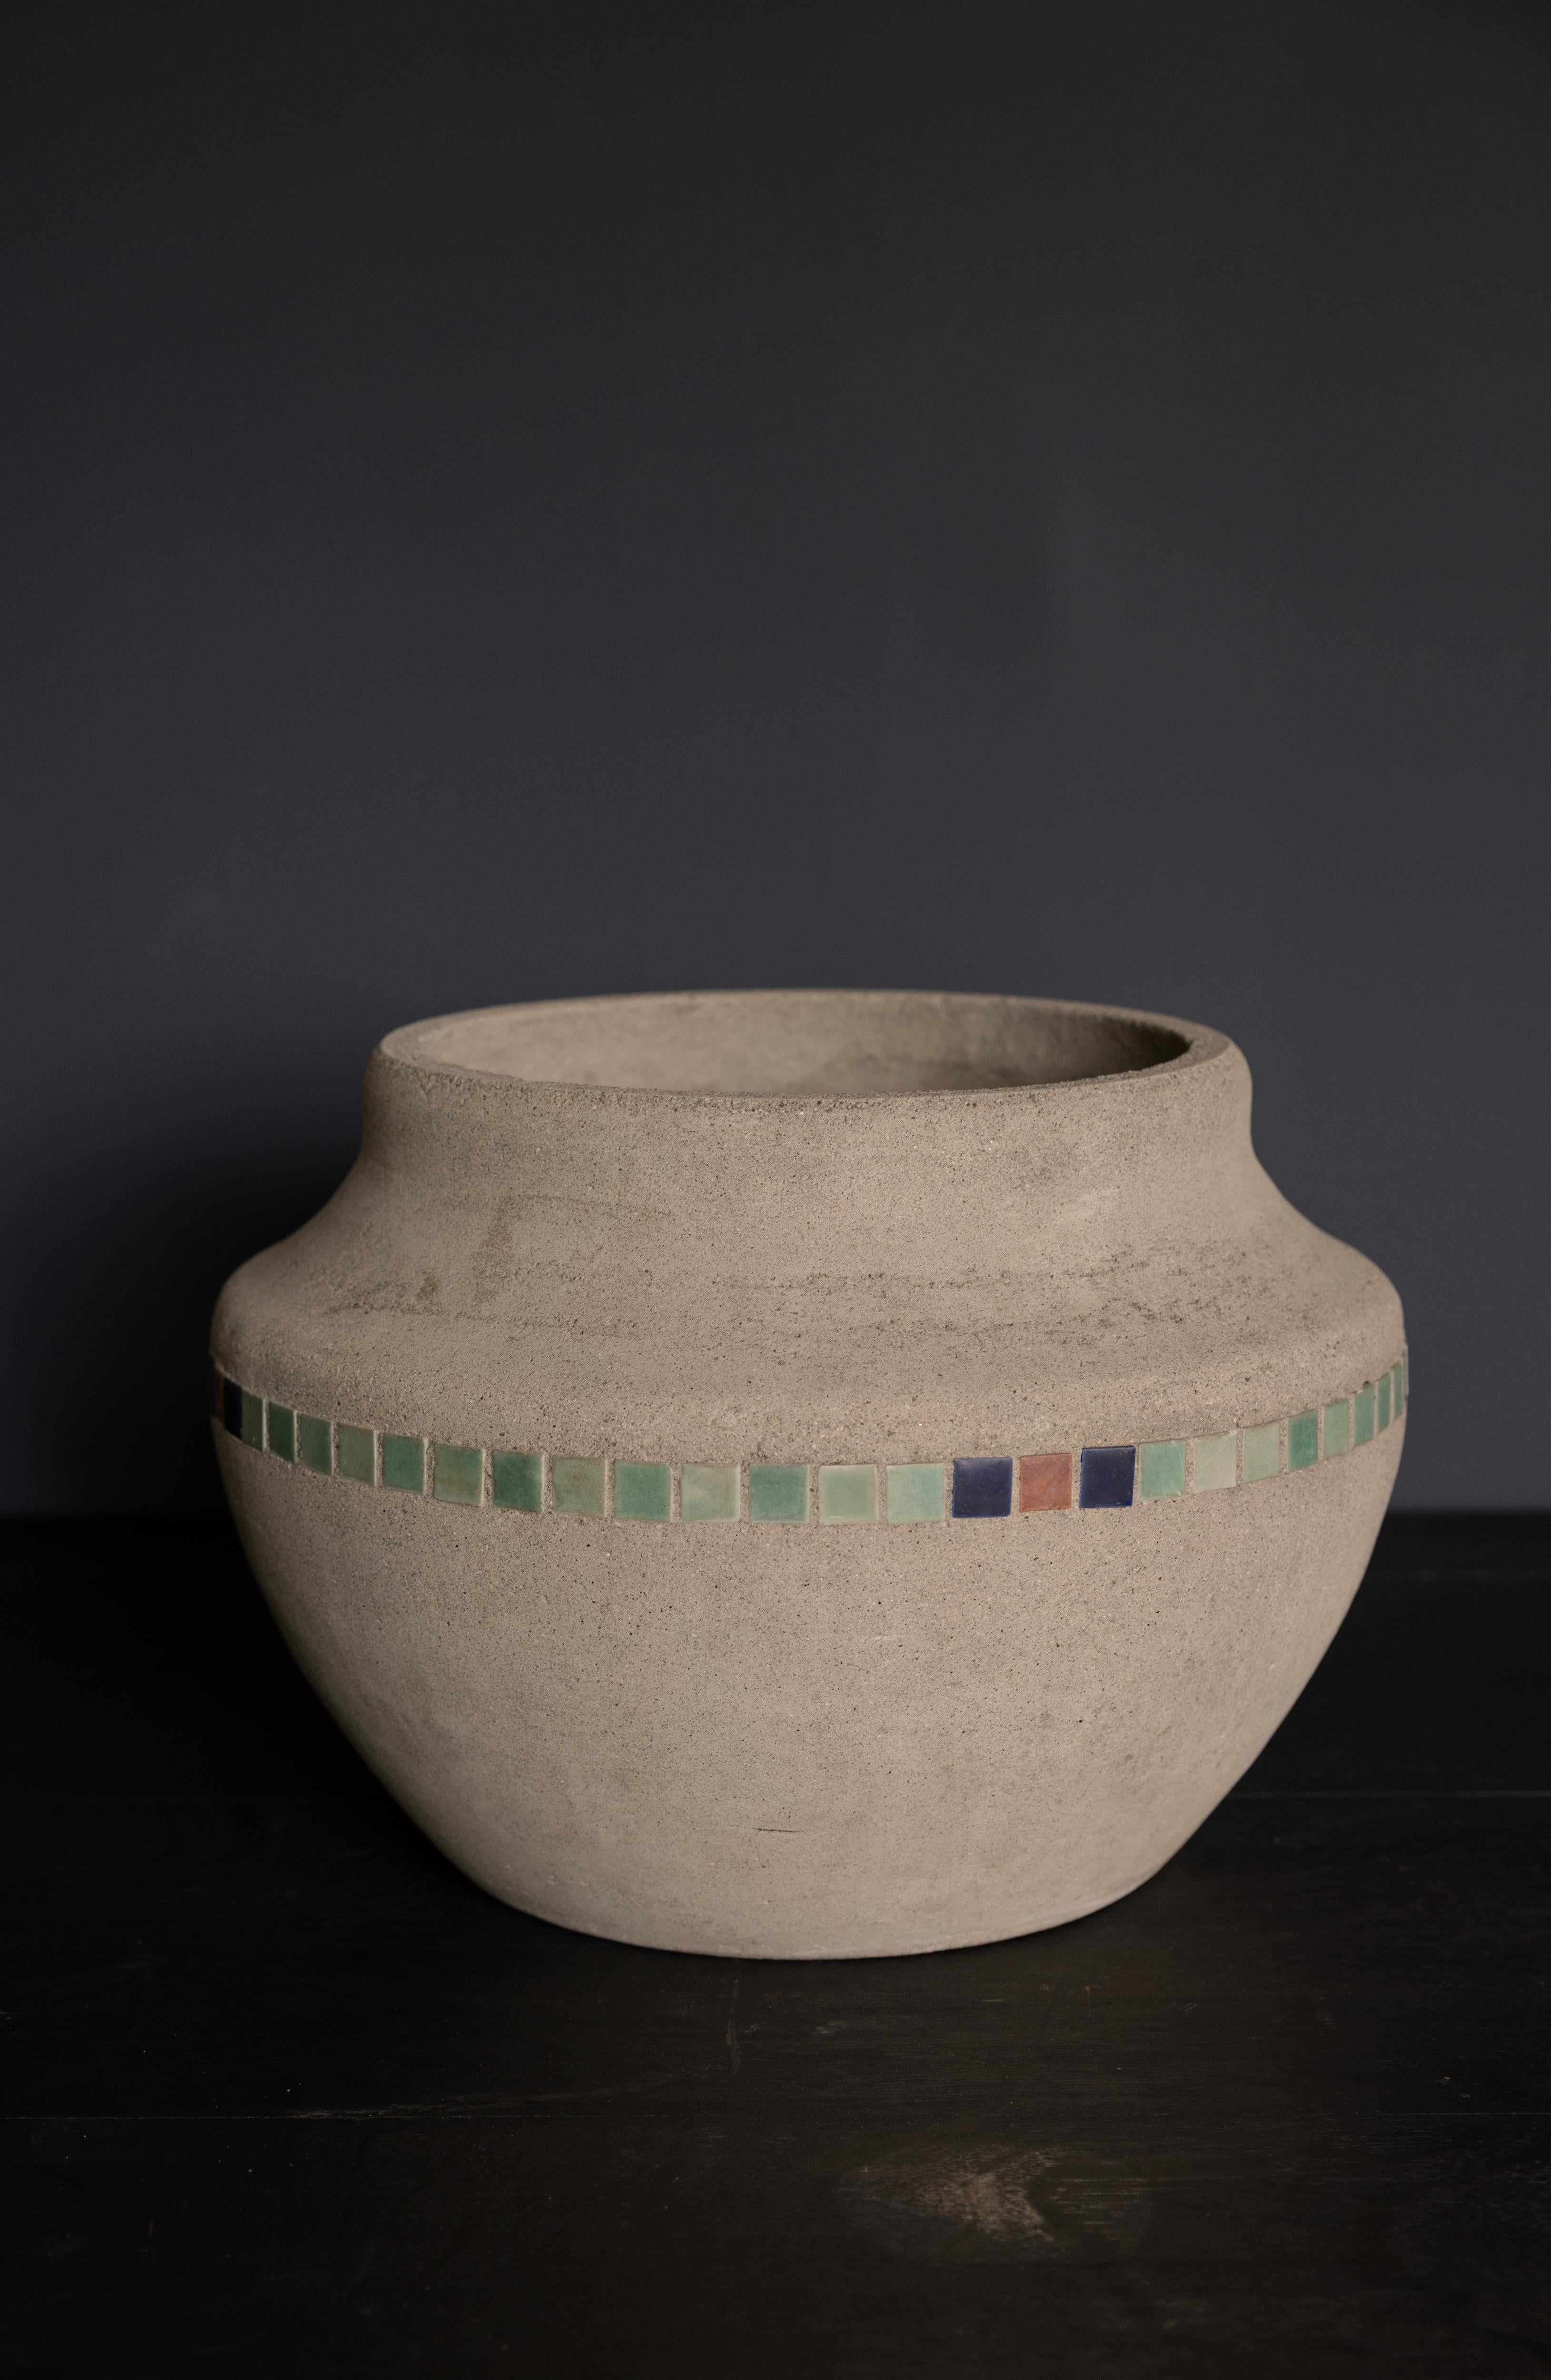 Concrete and Tiled Mosaic Planter by Hillside Pottery Company, c. 1920's, USA
Gray Concrete with Tiled Mosaic Band in Green with Blue and Pink

H 12.5